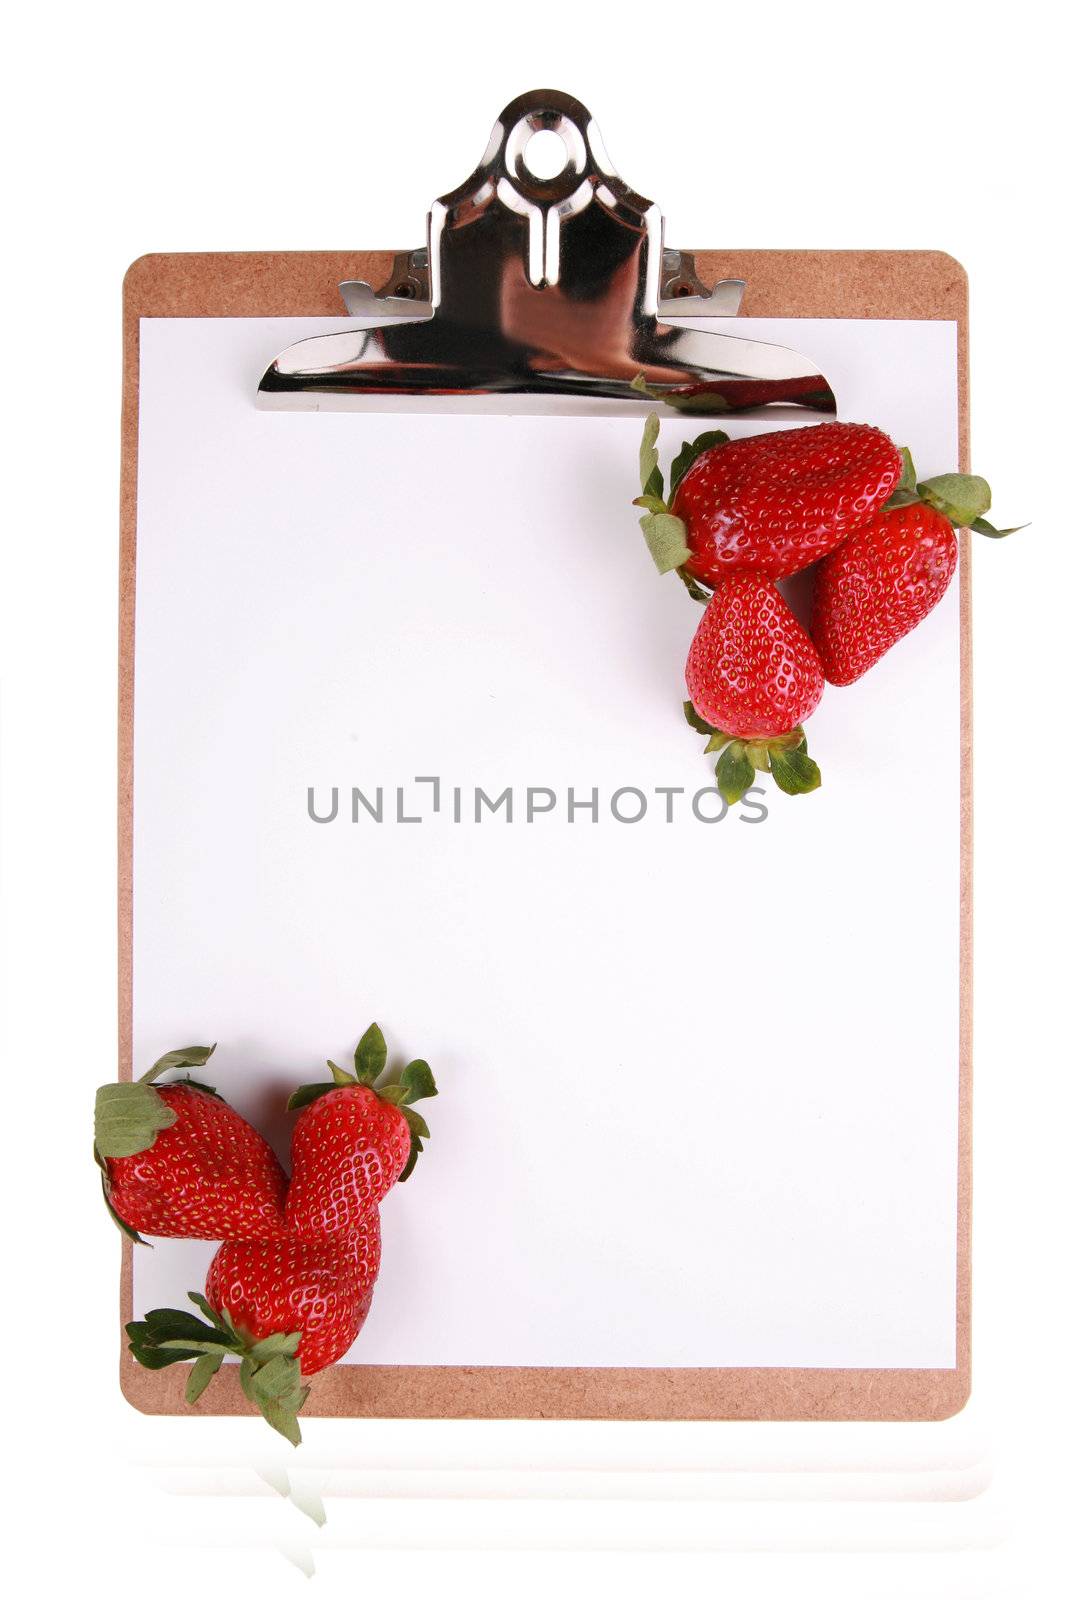 Strawberries on clipboard, healthy snack concept, isolated on white